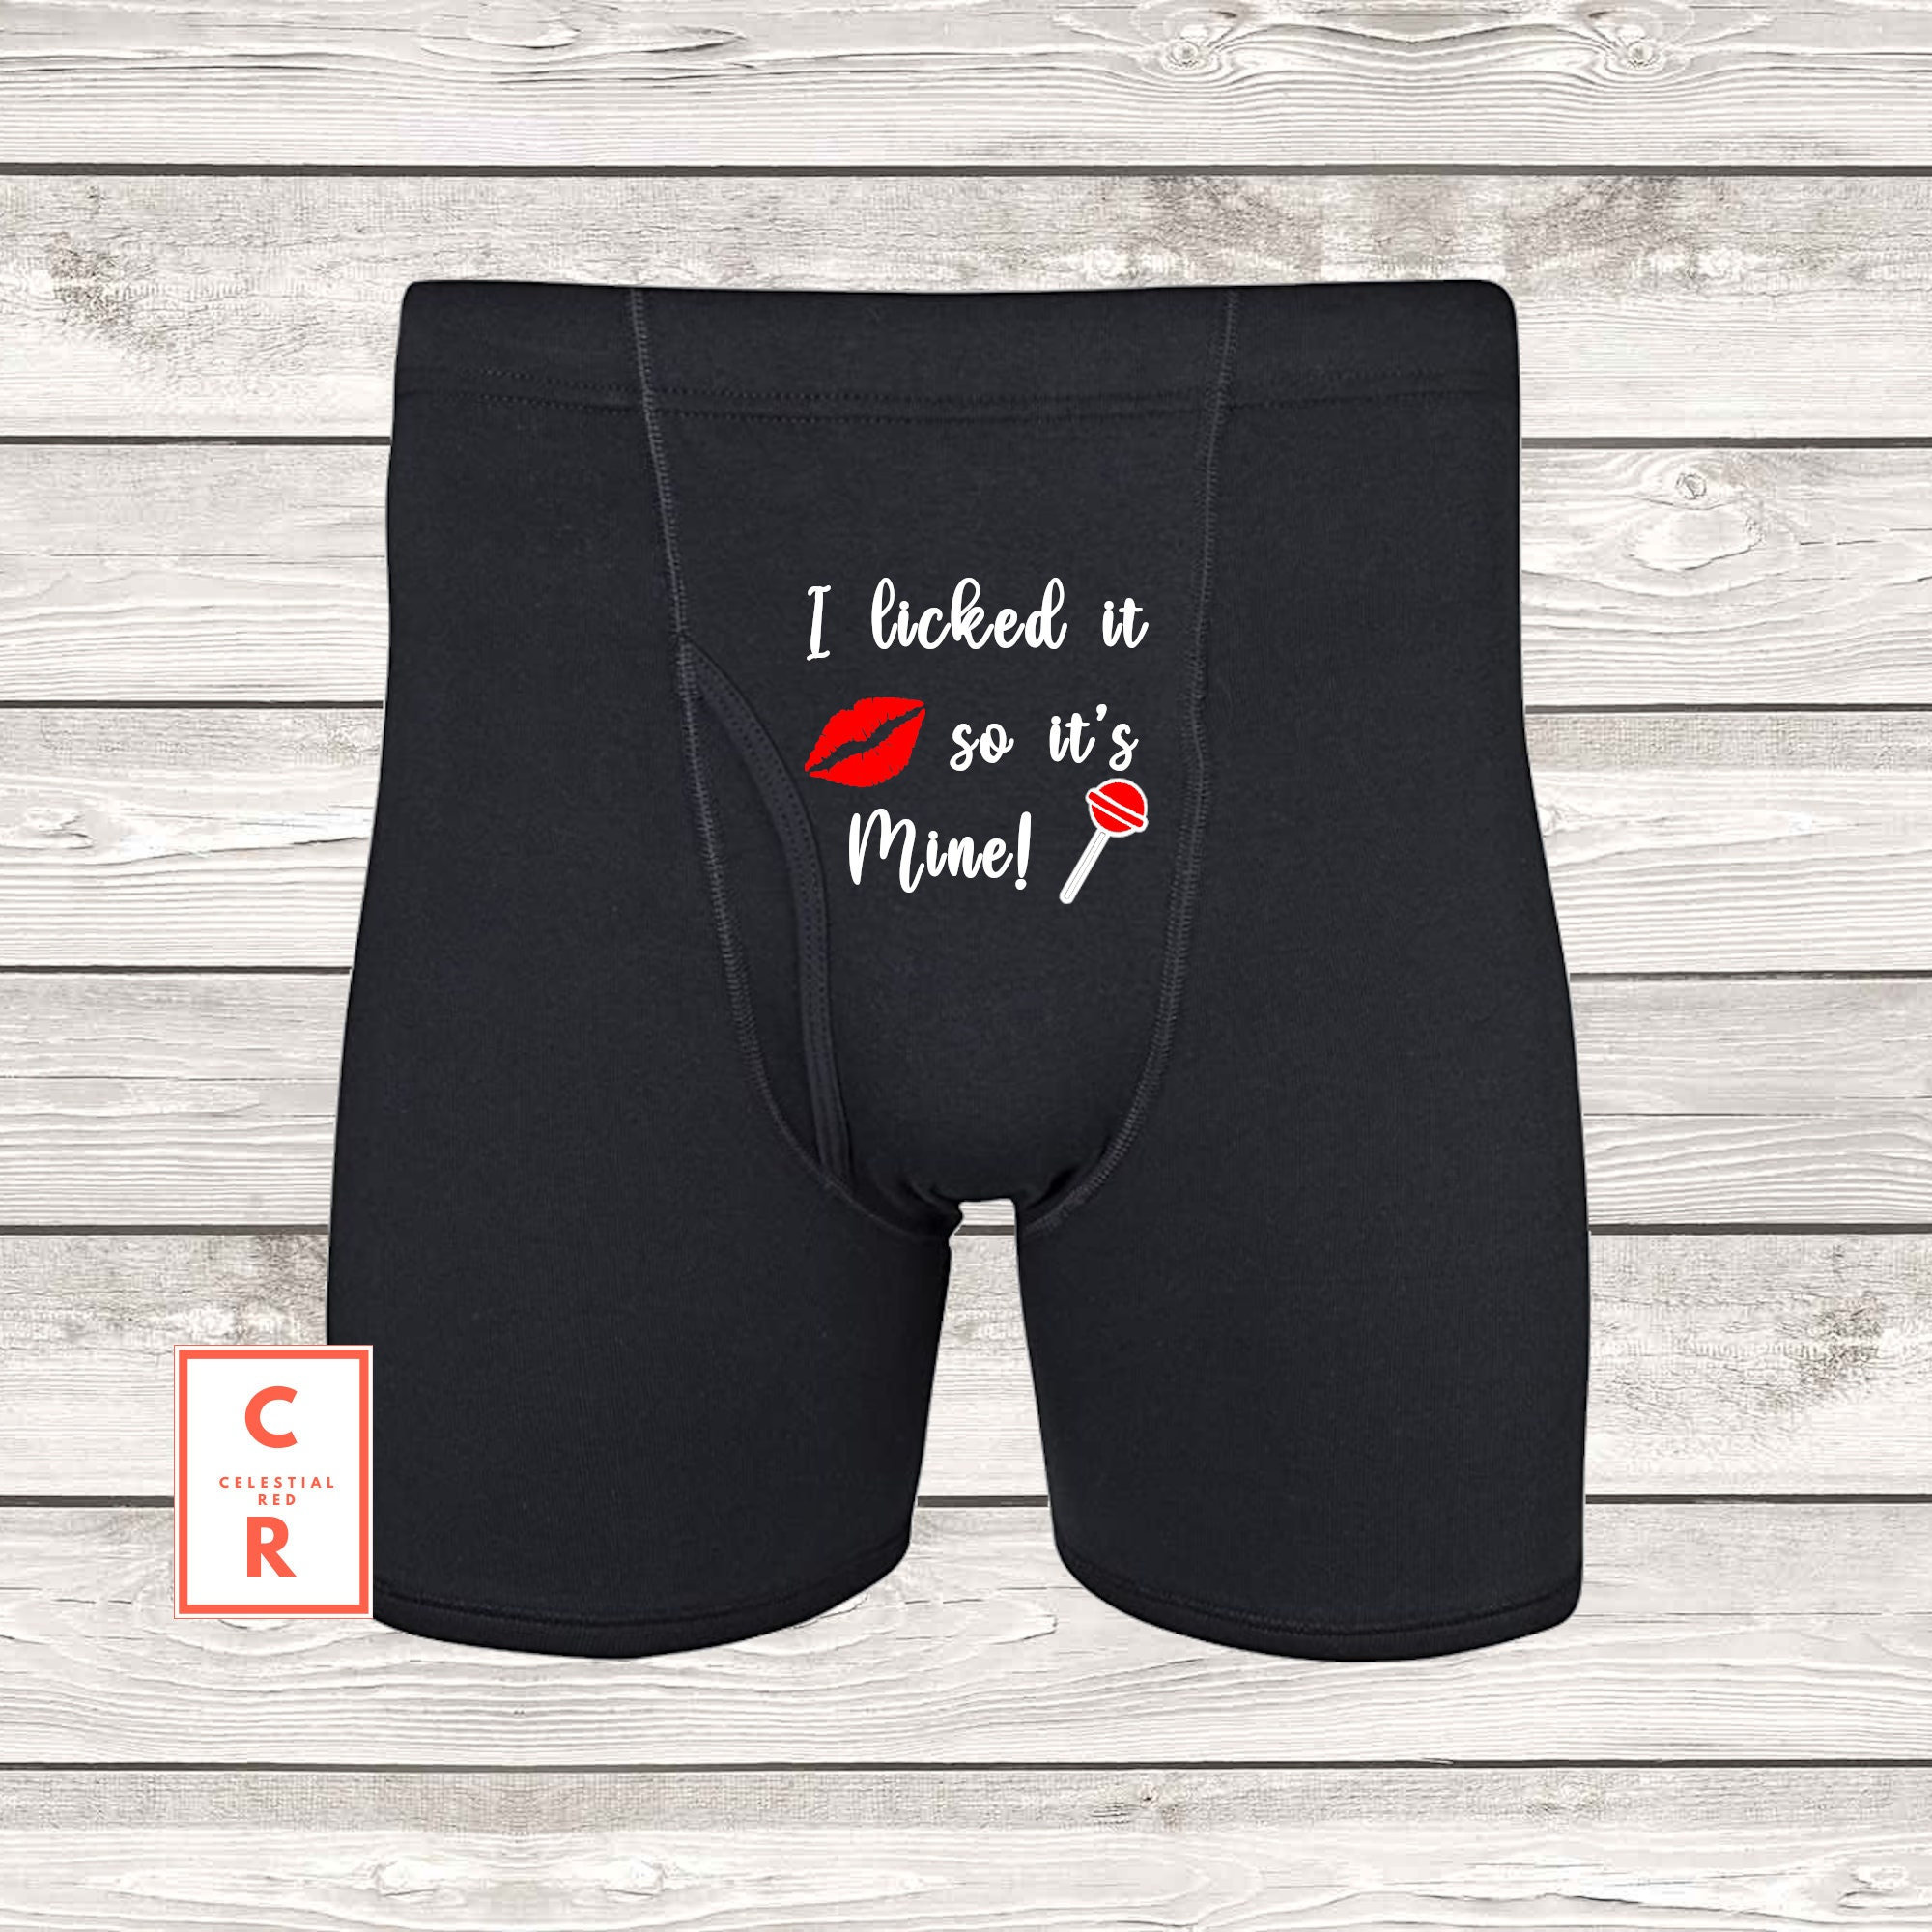 I Licked It Mens Boxer Briefs / Naughty Gift for Him Sexy Gift for  Boyfriend / BDSM Kink Naughty Mens Boxers / Funny Gag Gift Bachelor Party -   Canada